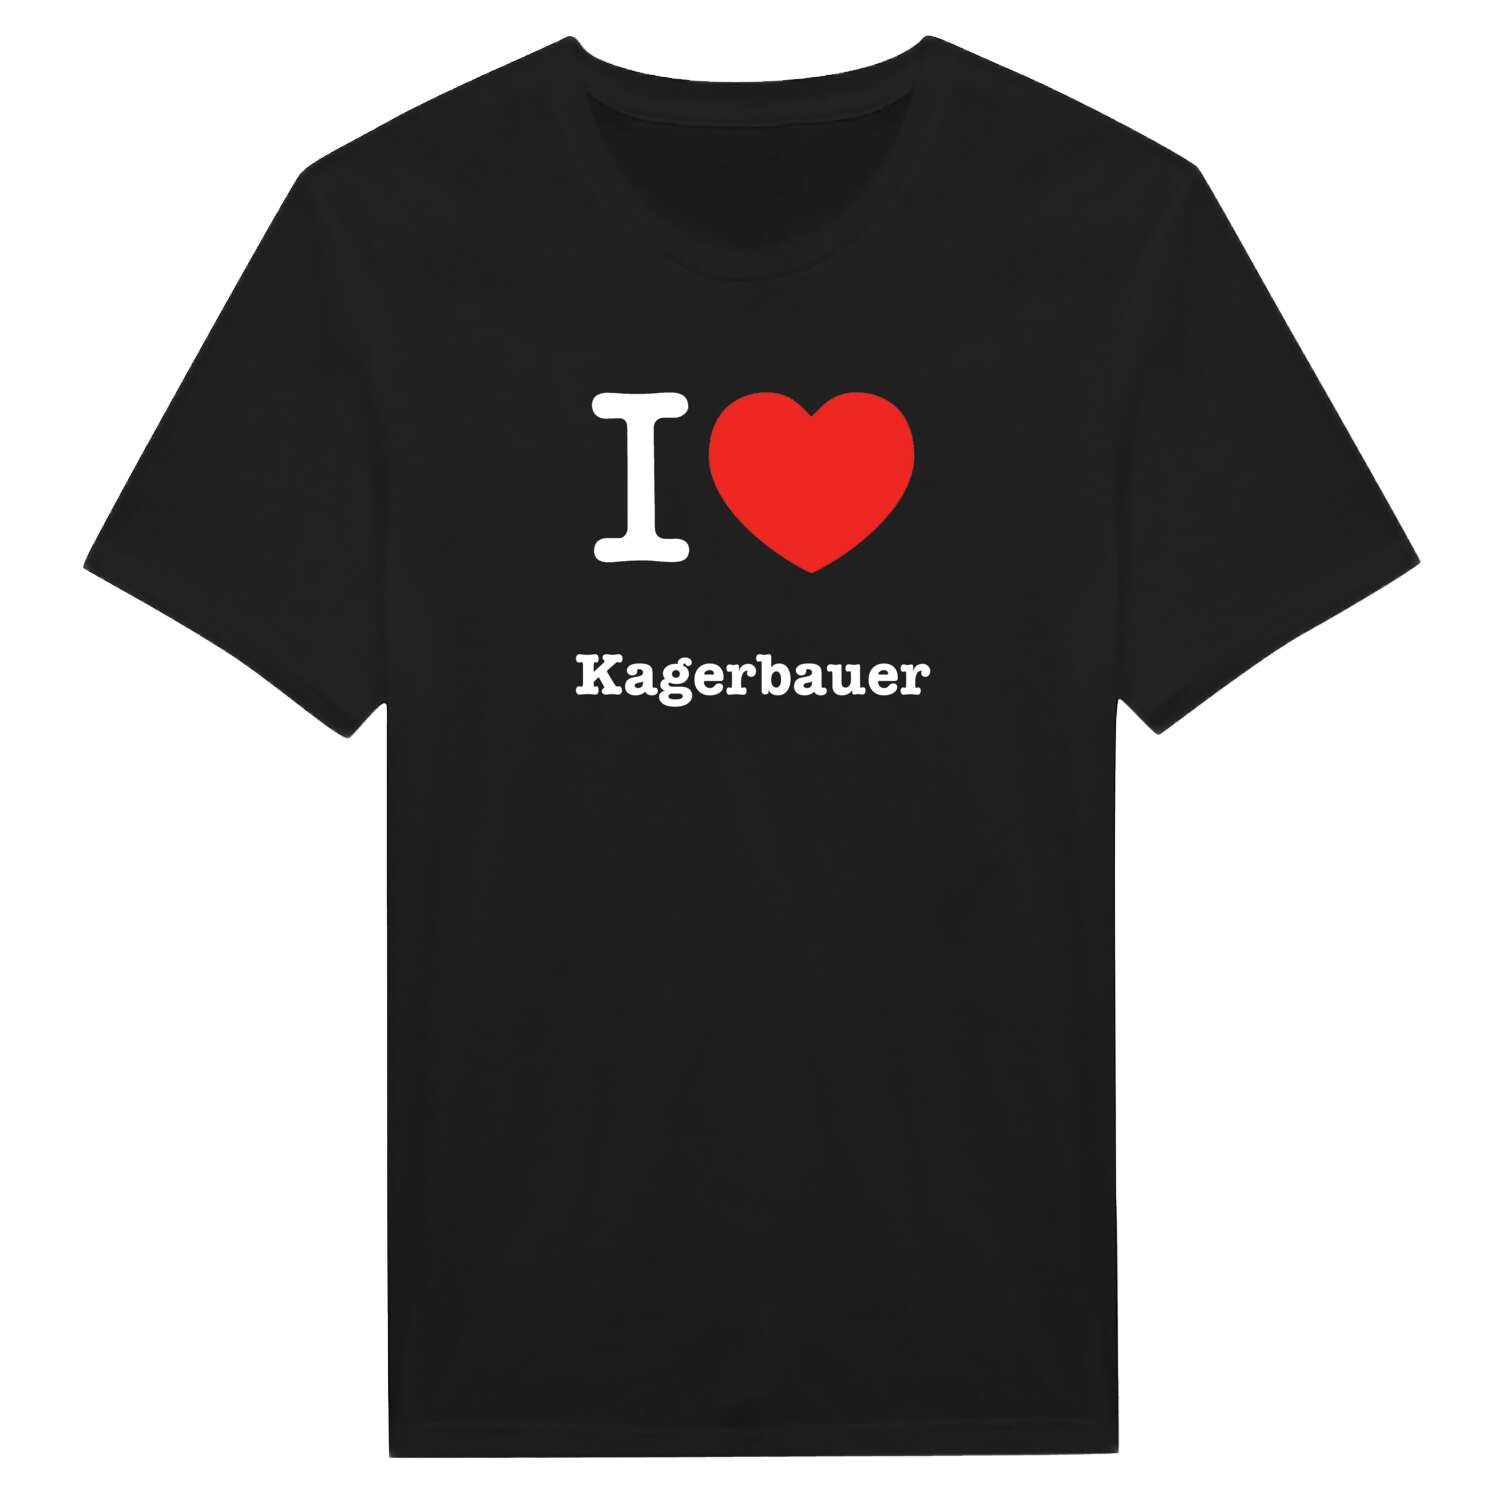 Kagerbauer T-Shirt »I love«